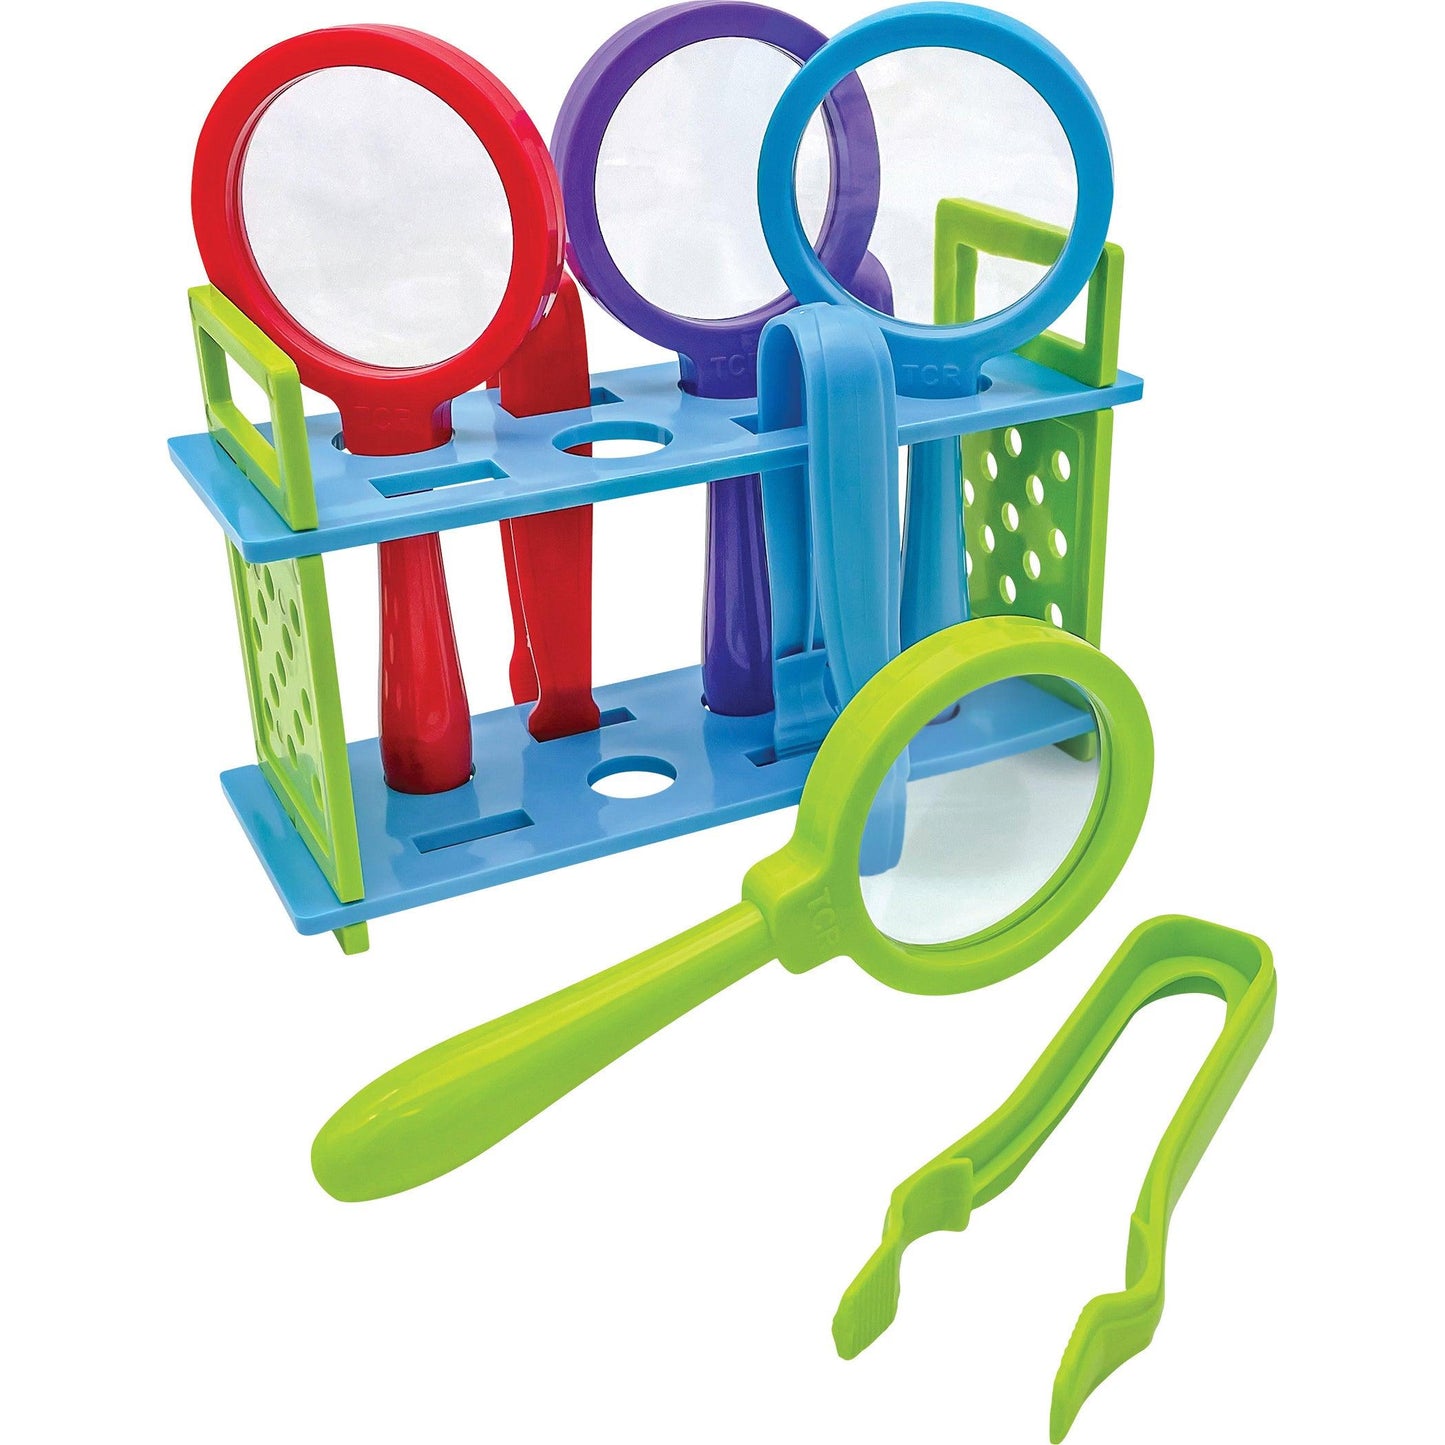 Up-Close Science: Magnifying Glasses & Tweezers Activity Set - Loomini